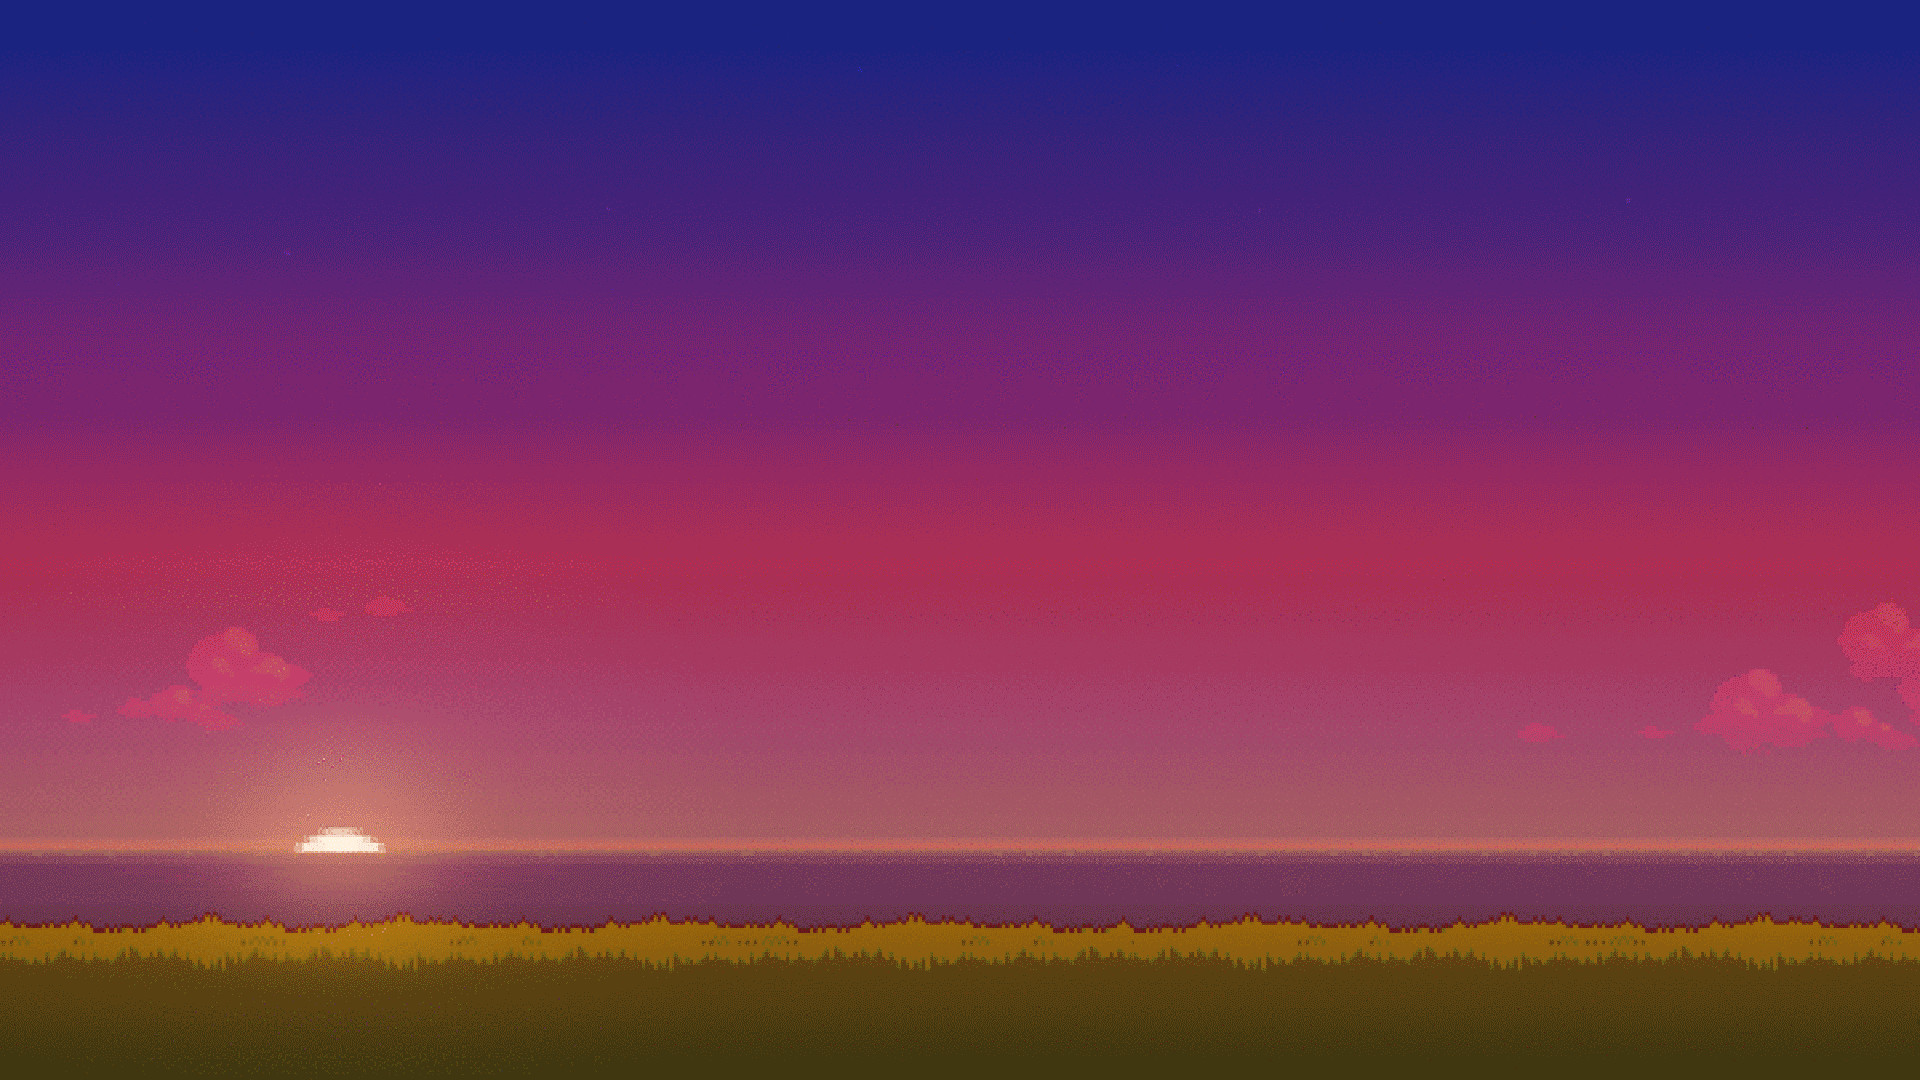 1920x1080 I turned the 8Bit Day wallpaper into a GIF.